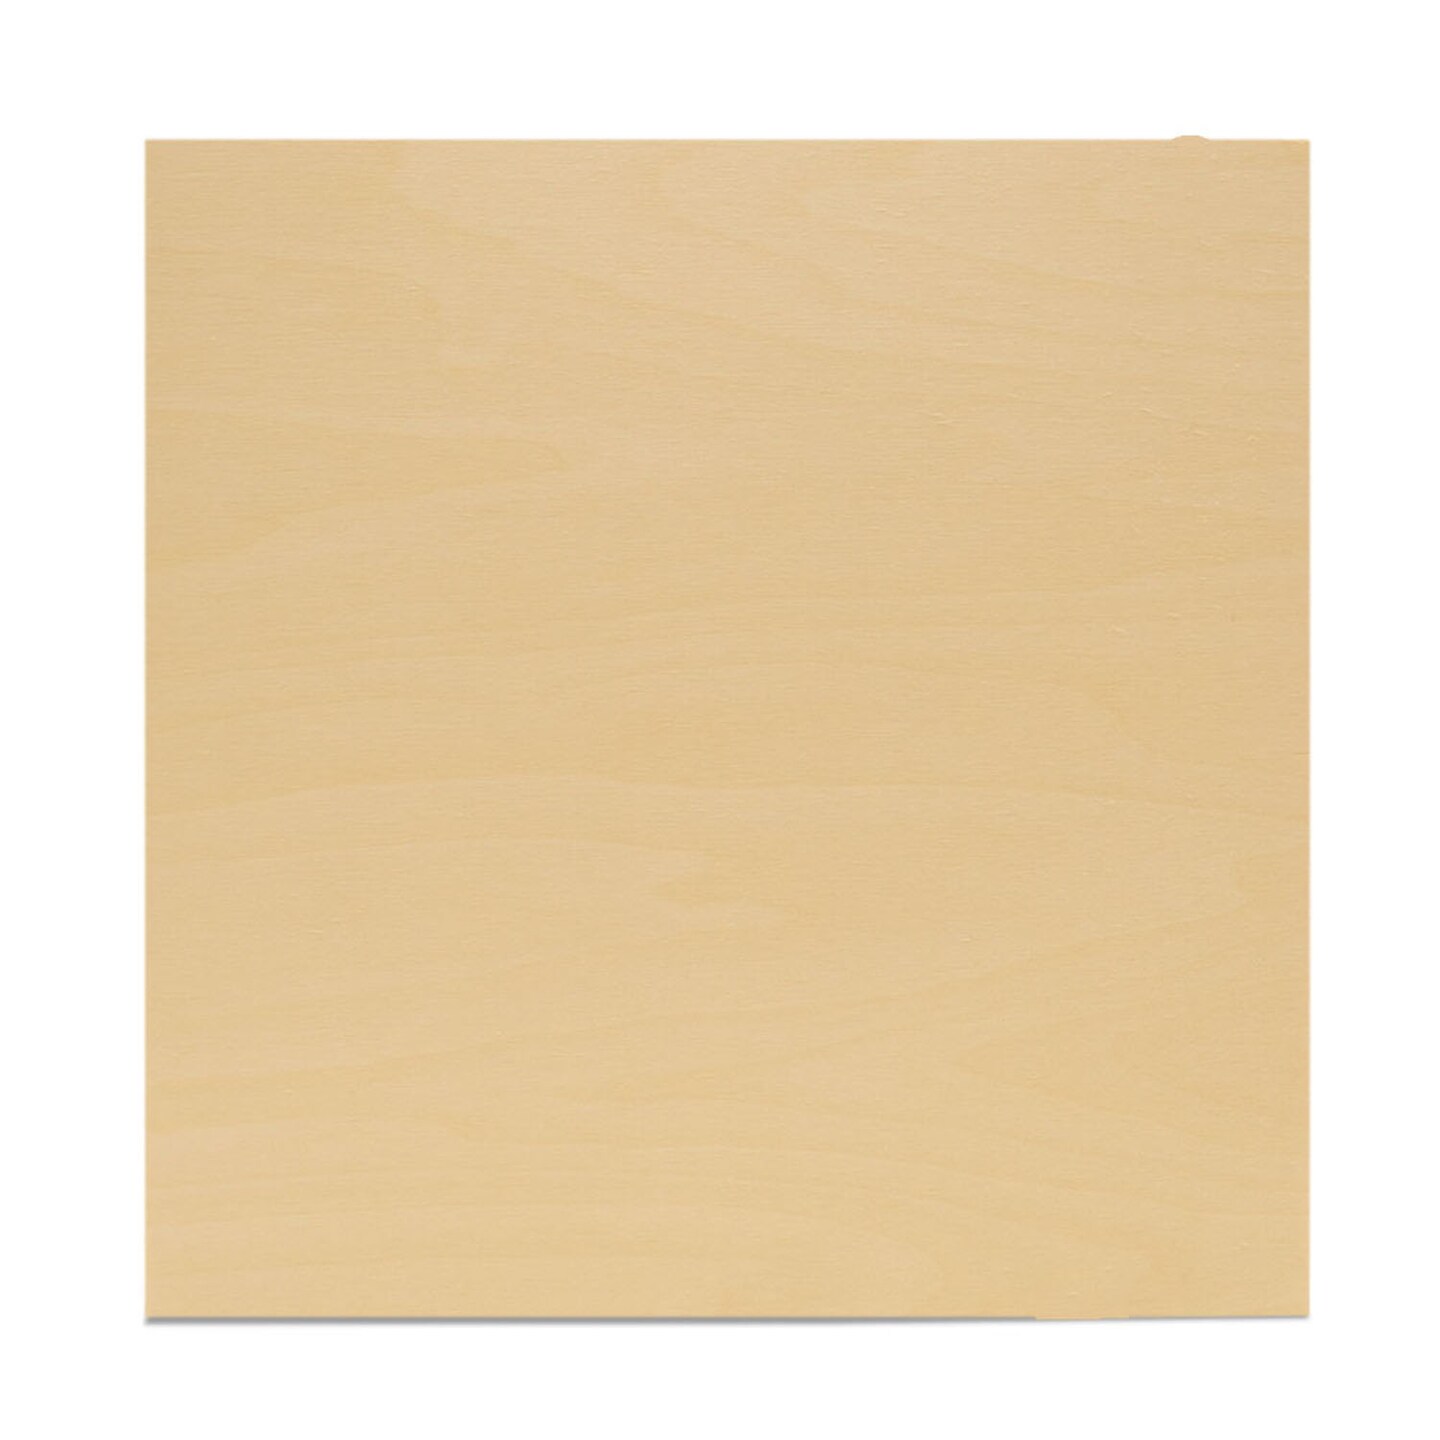 Baltic Birch Plywood, 10 x 10 Inch, B/BB Grade Sheets, 1/4 or 1/8 Inch Thick| Woodpeckers